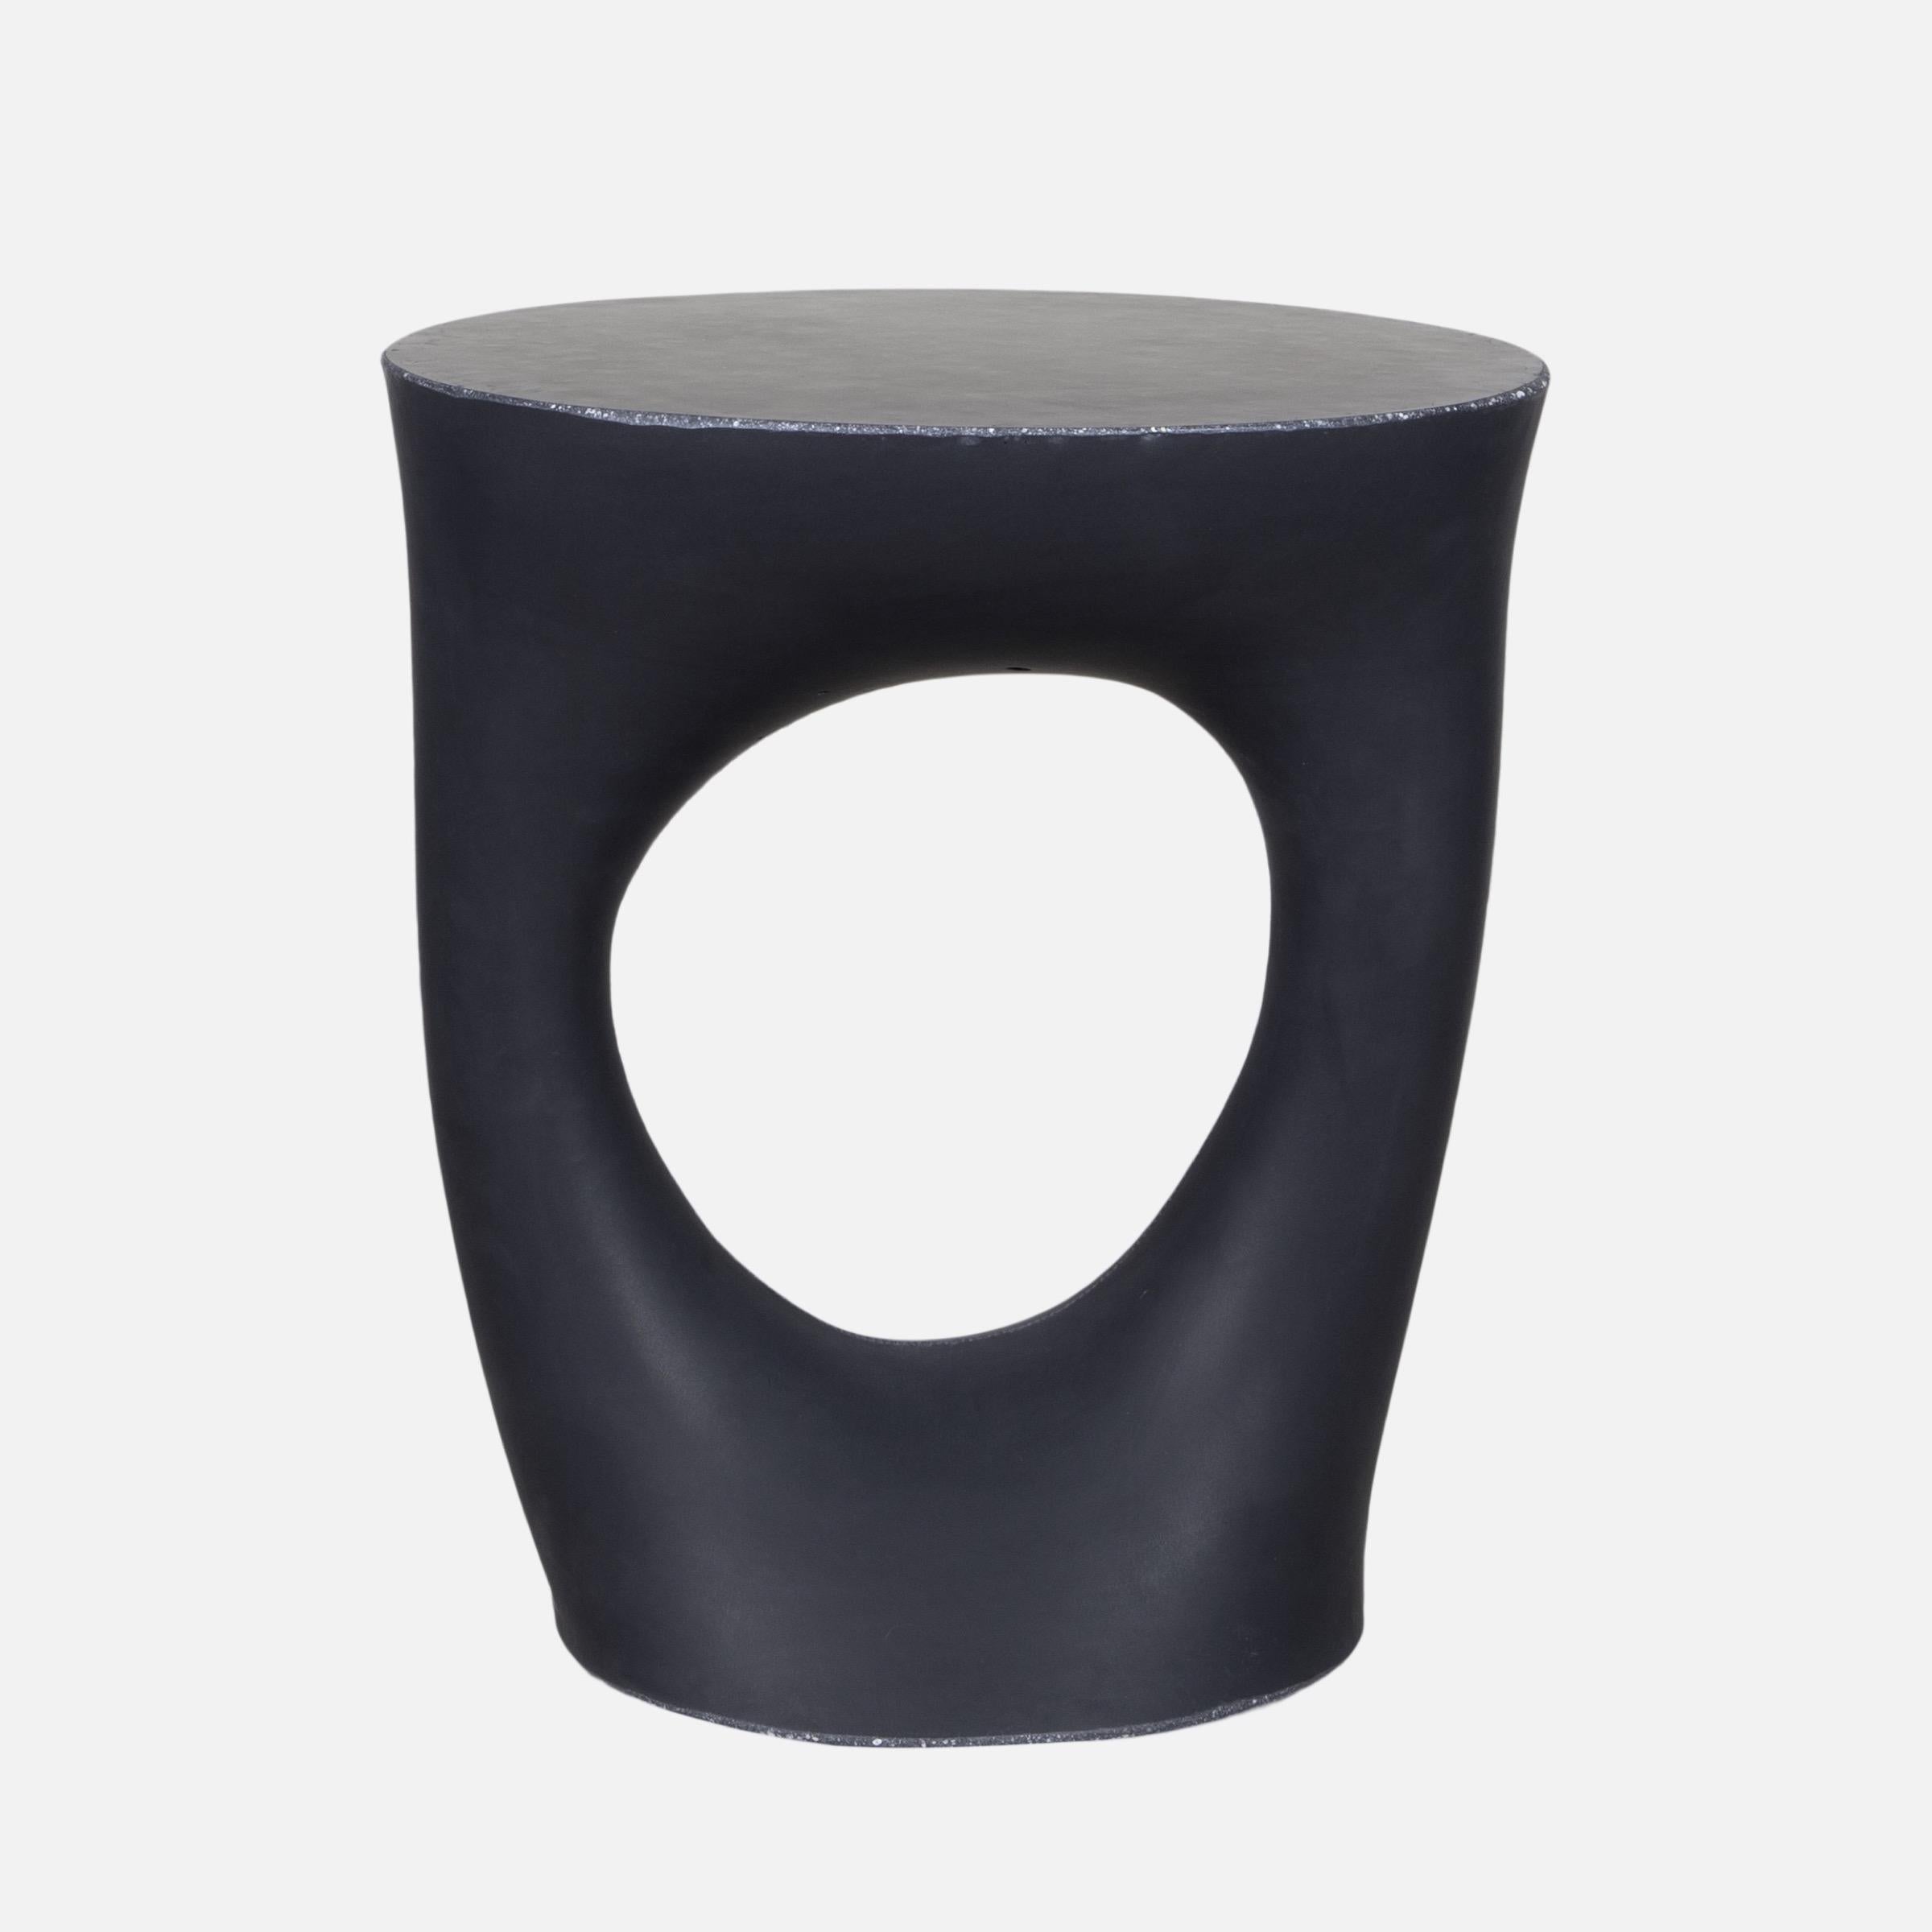 Modern Black Kreten Side Tables from Souda, Tall, Made to Order